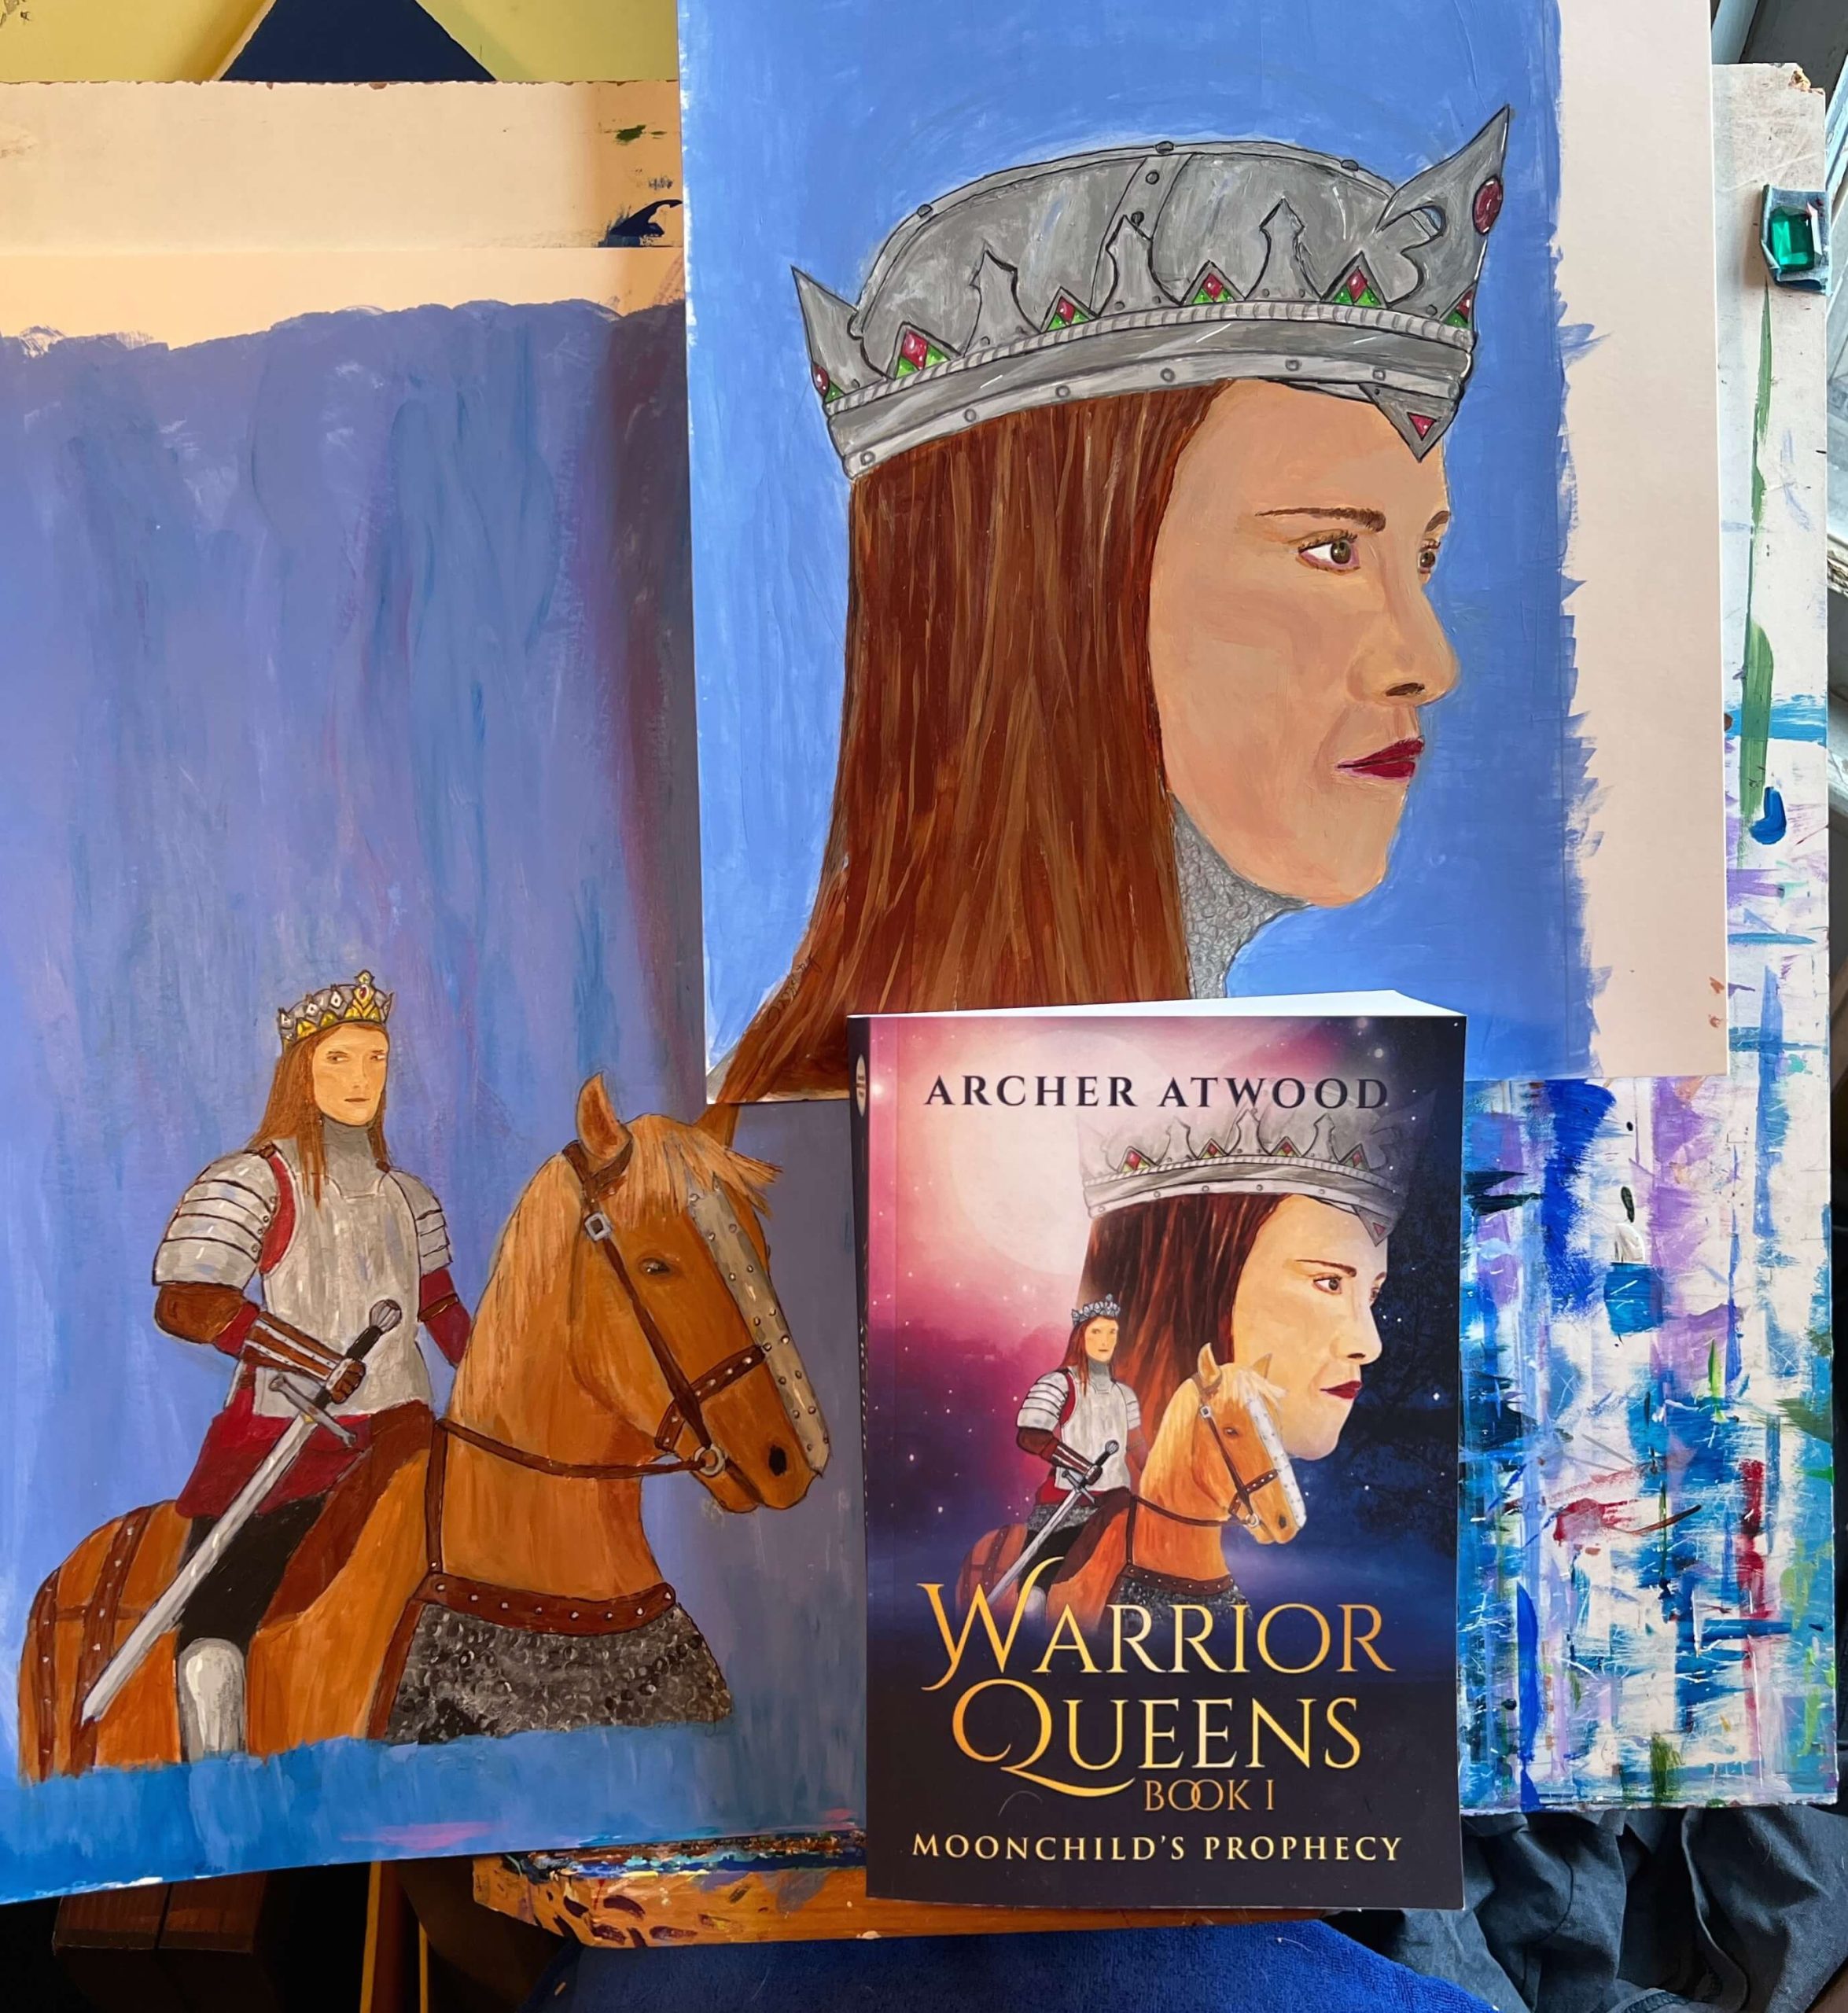 Warrior Queens book cover and art